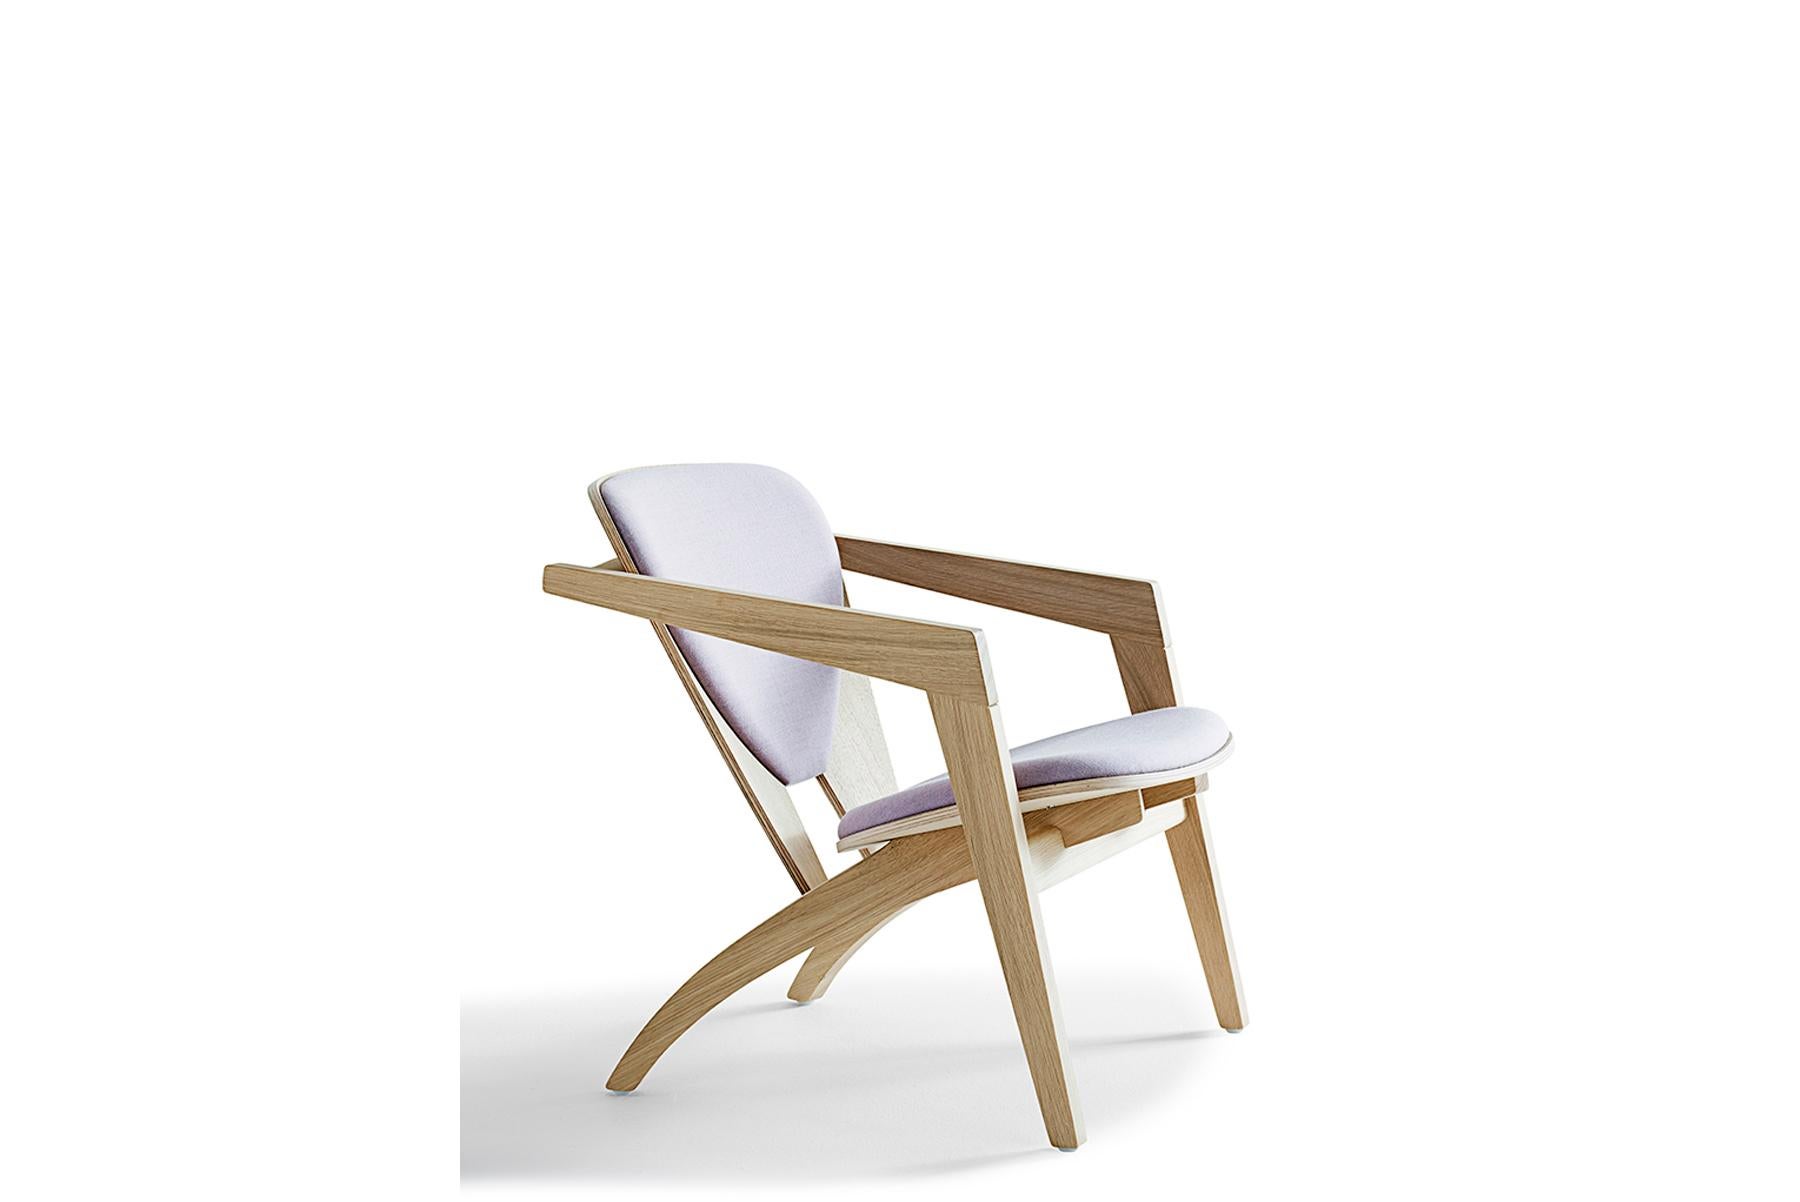 Designed by Hans Wegner for GETAMA in 1977, the 460 “Butterfly” lounge chair is a perfect addition to any modern or contemporary interior. The chair is hand built at GETAMA’s factory in Gedsted, Denmark by skilled cabinetmakers using traditional